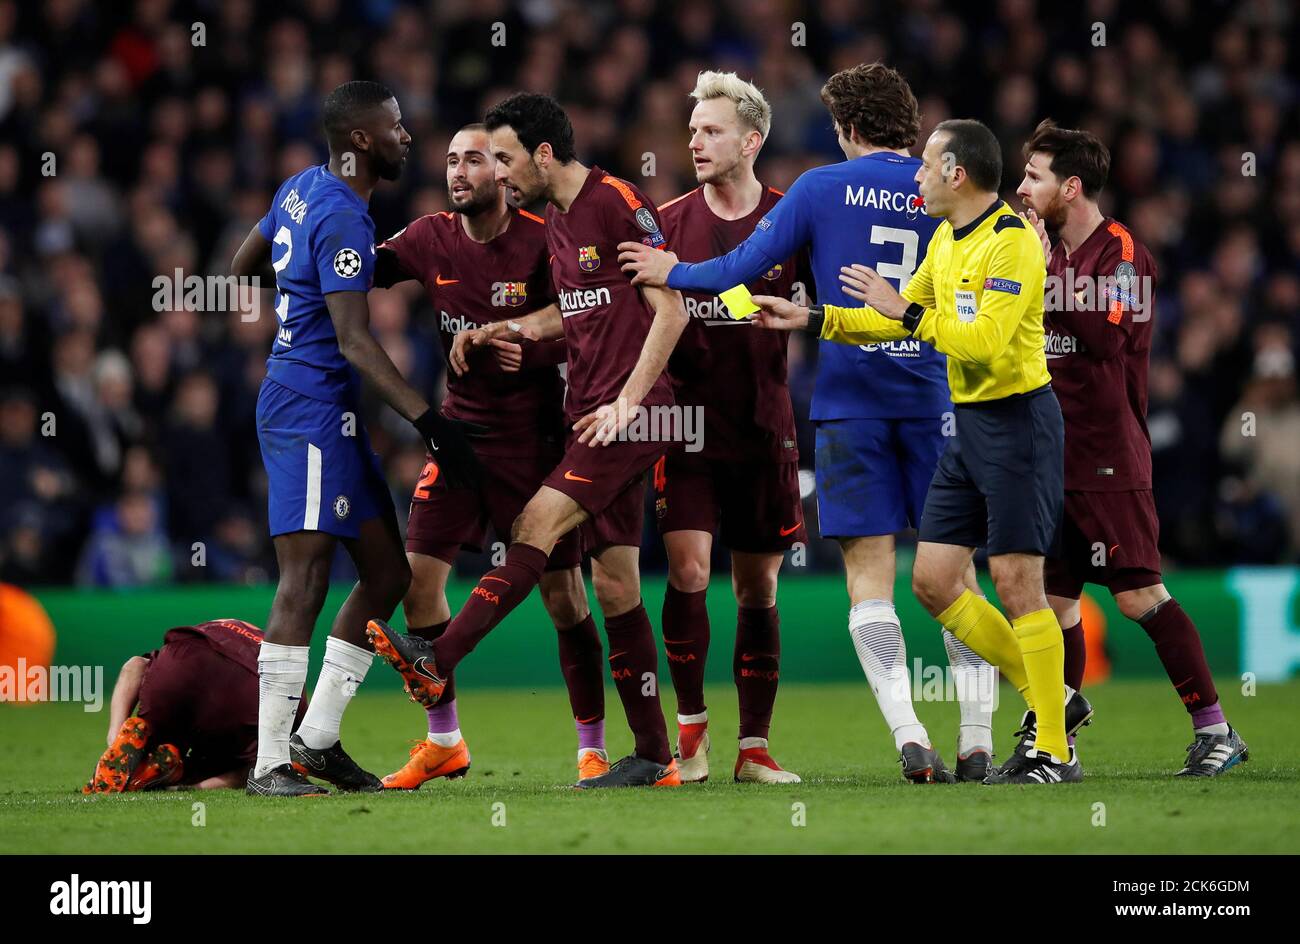 Soccer Football - Champions League Round of 16 First Leg - Chelsea vs FC Barcelona - Stamford Bridge, London, Britain - February 20, 2018   Chelsea's Antonio Rudiger is shown a yellow card by referee Cuneyt Cakir for a foul on Barcelona’s Sergi Roberto   REUTERS/Eddie Keogh Stock Photo